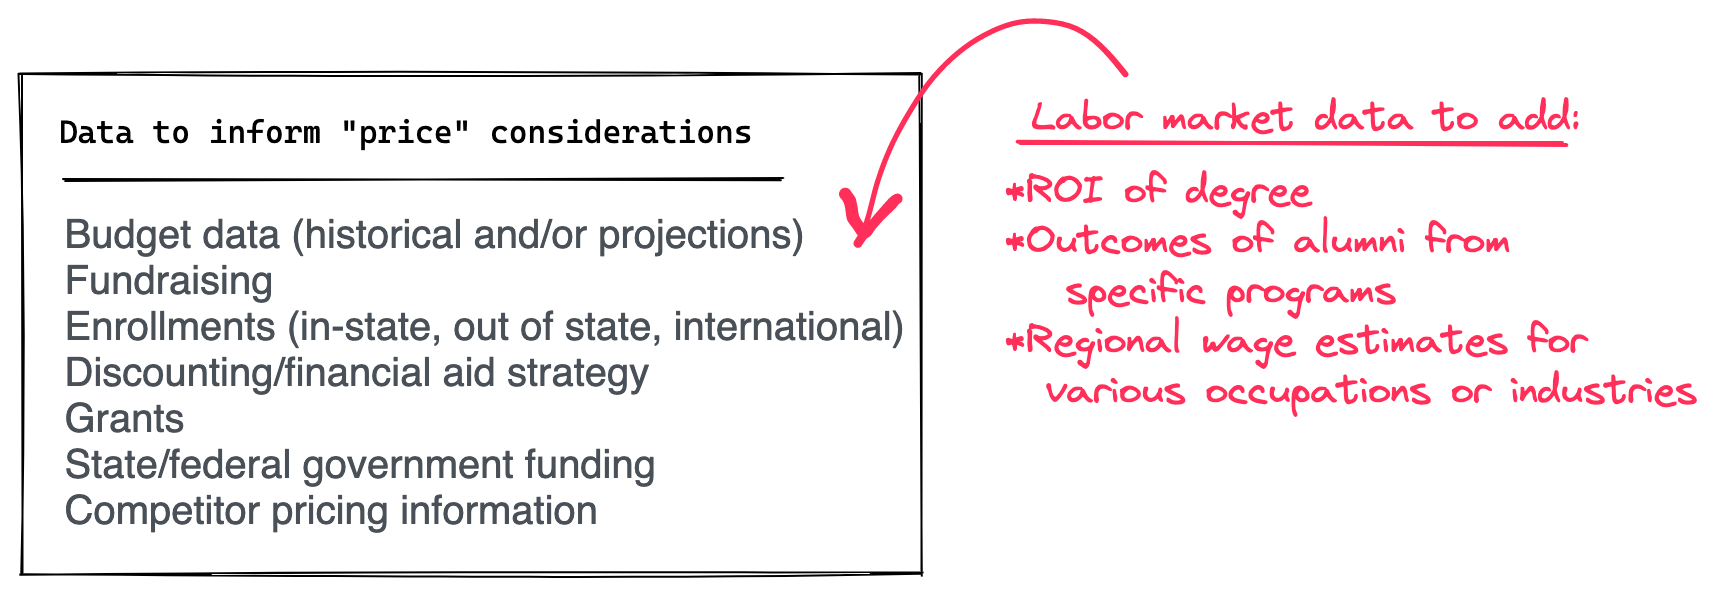 Data used to inform "price" considerations in a higher education marketing plan — and what labor market data to add